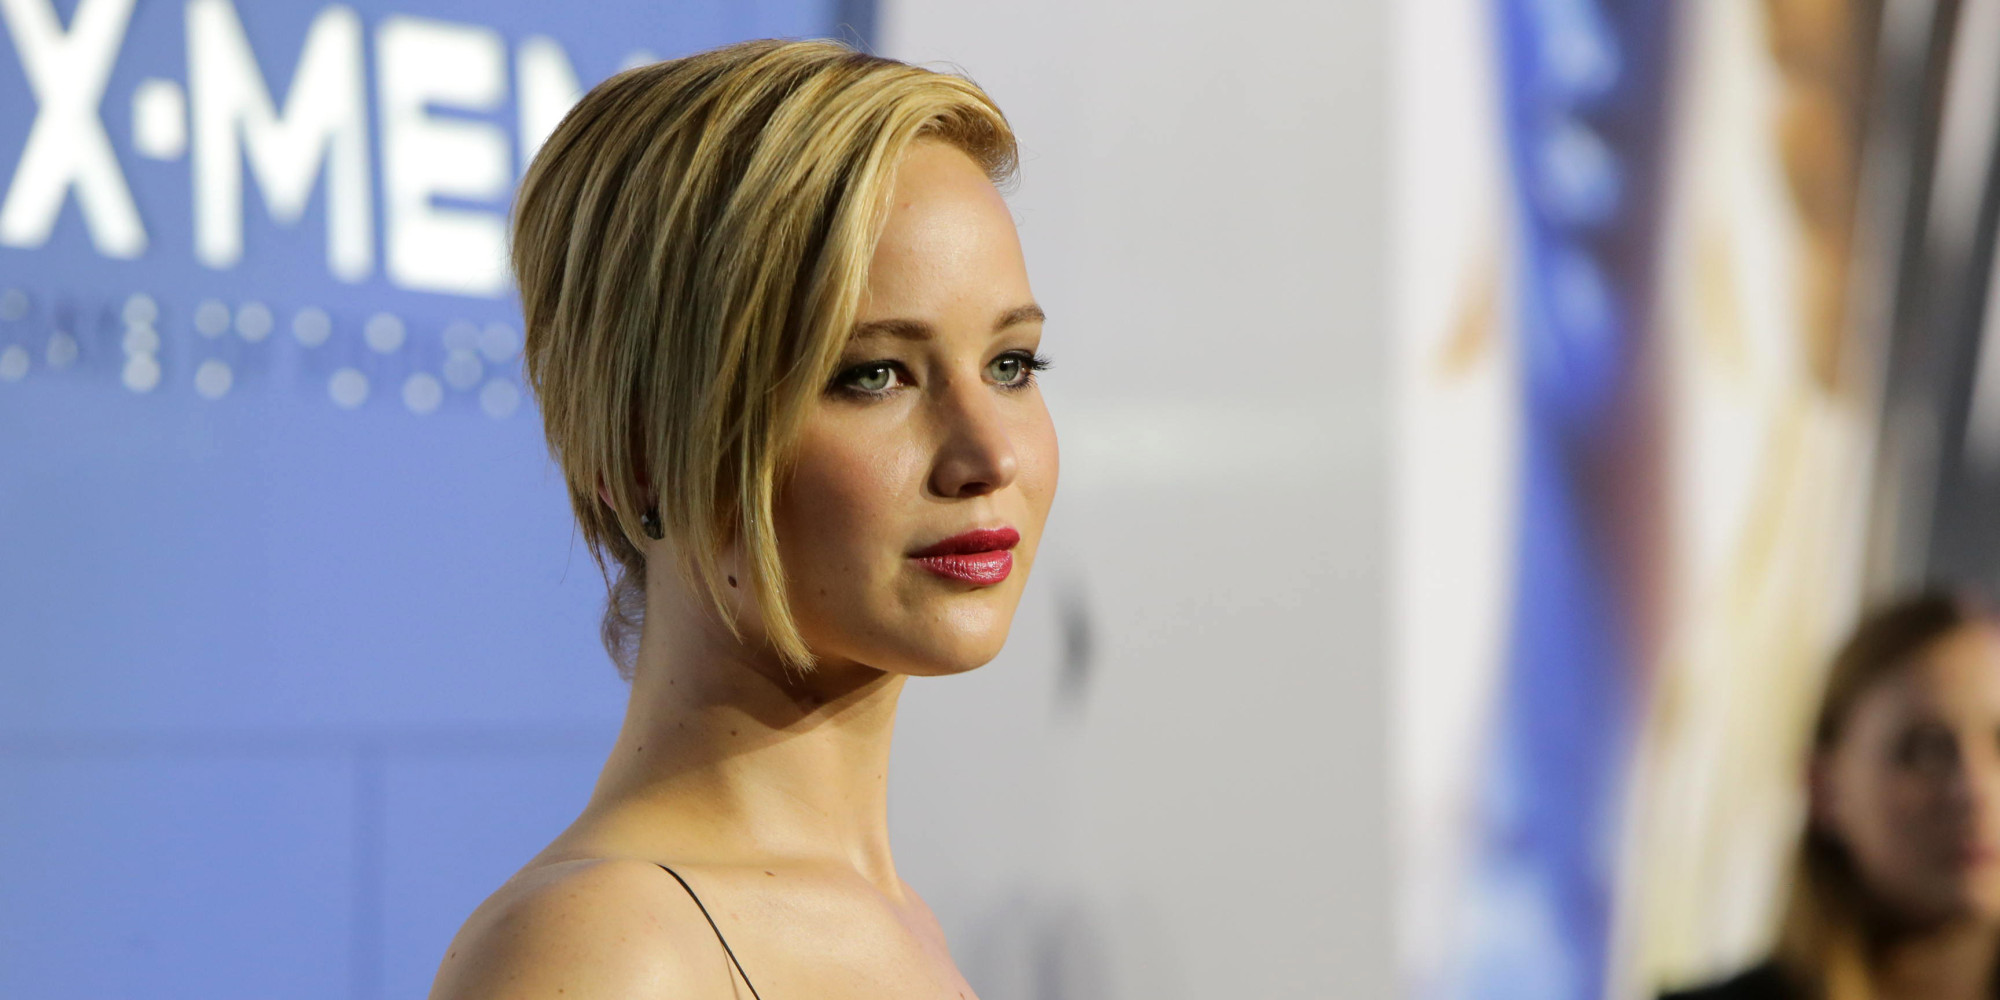 Finally: Reddit bans page with hacked nude celebrity 